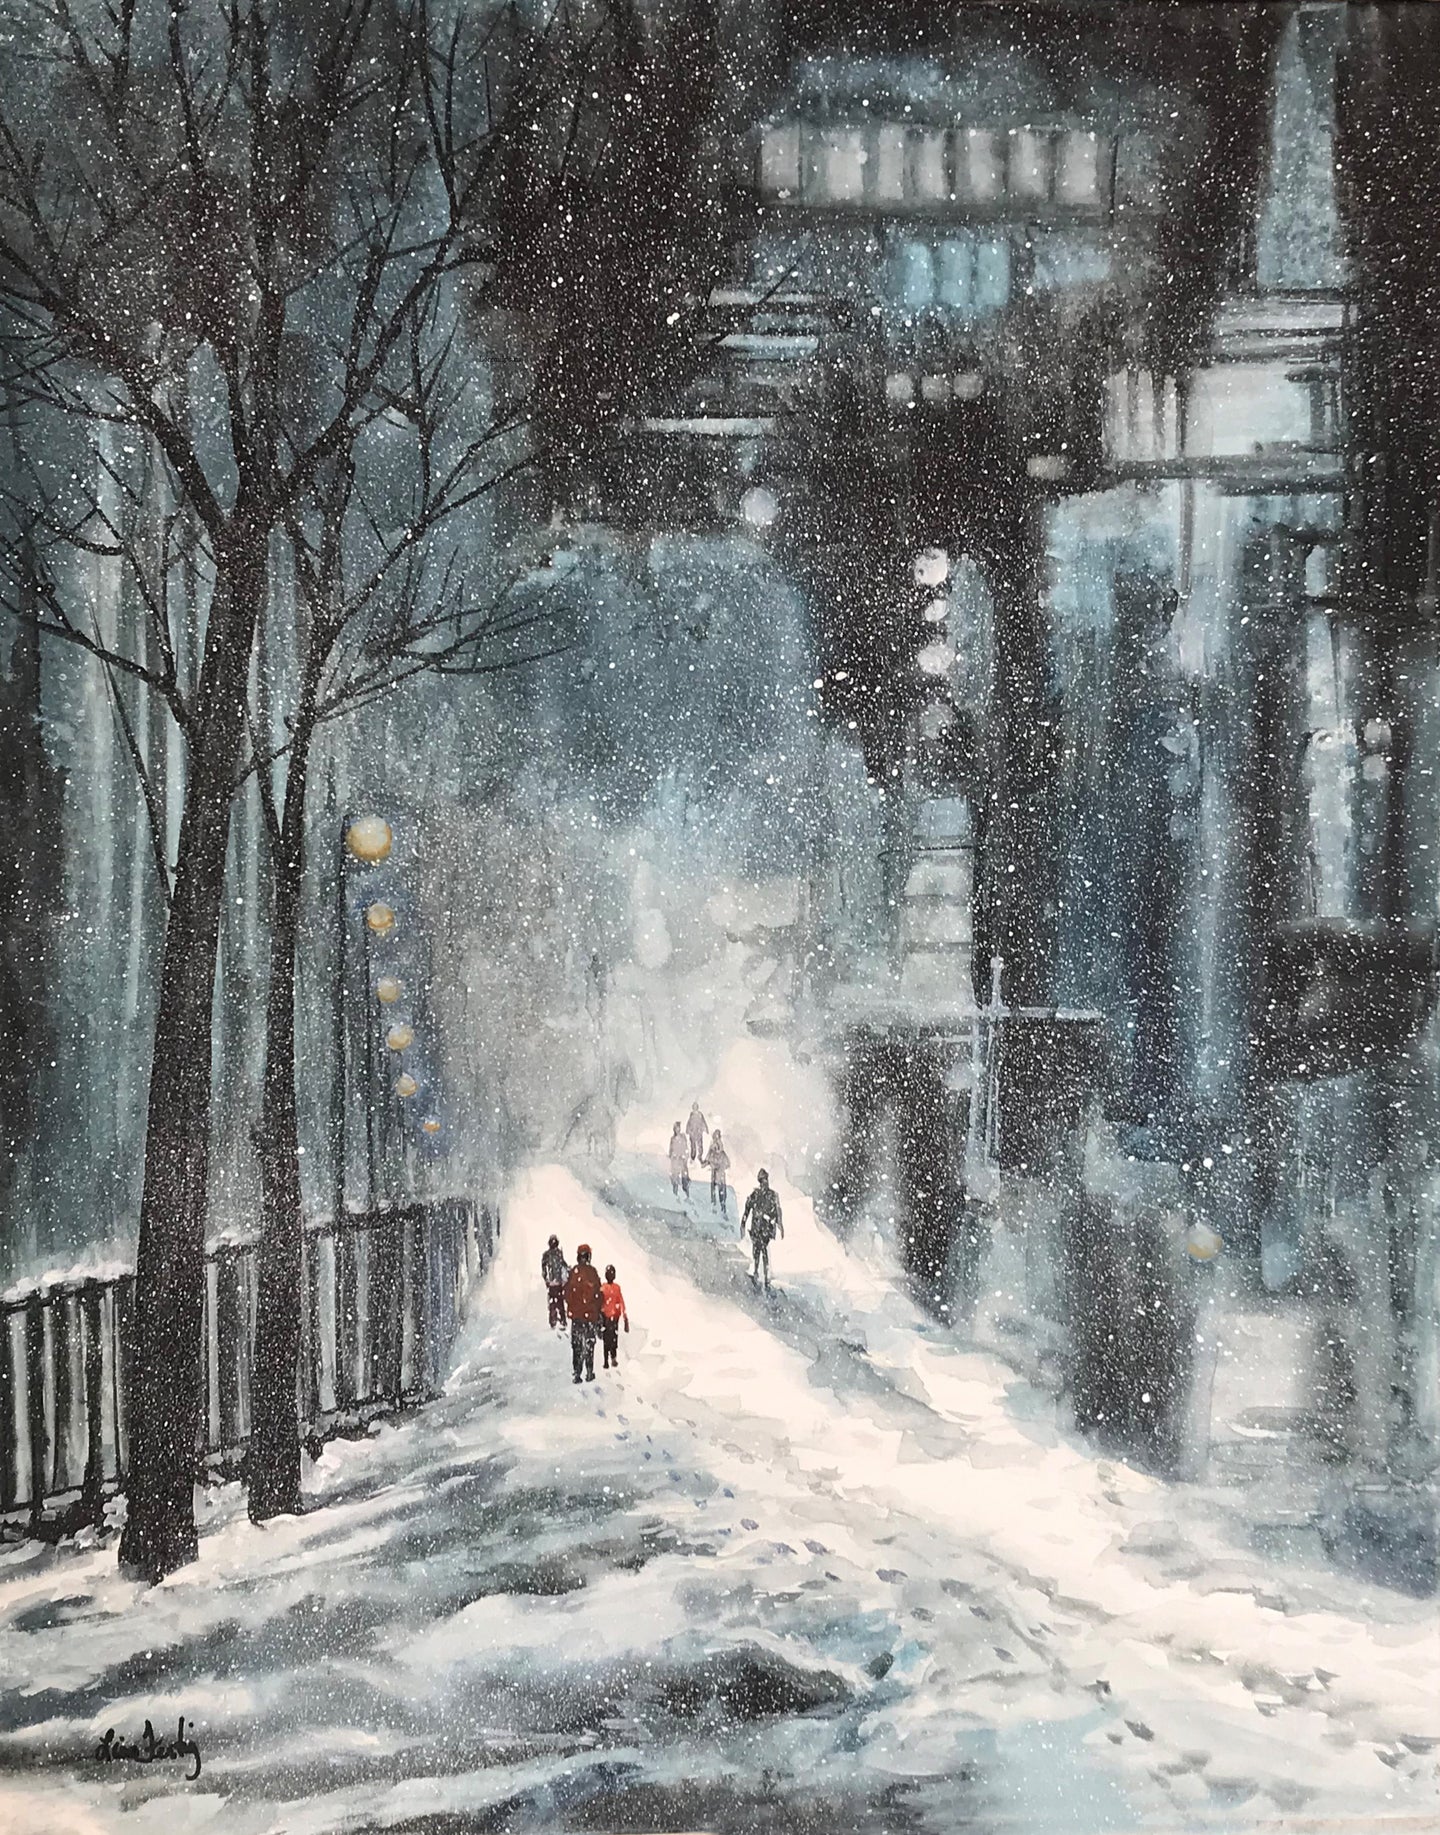 Snowy Night on the Streets